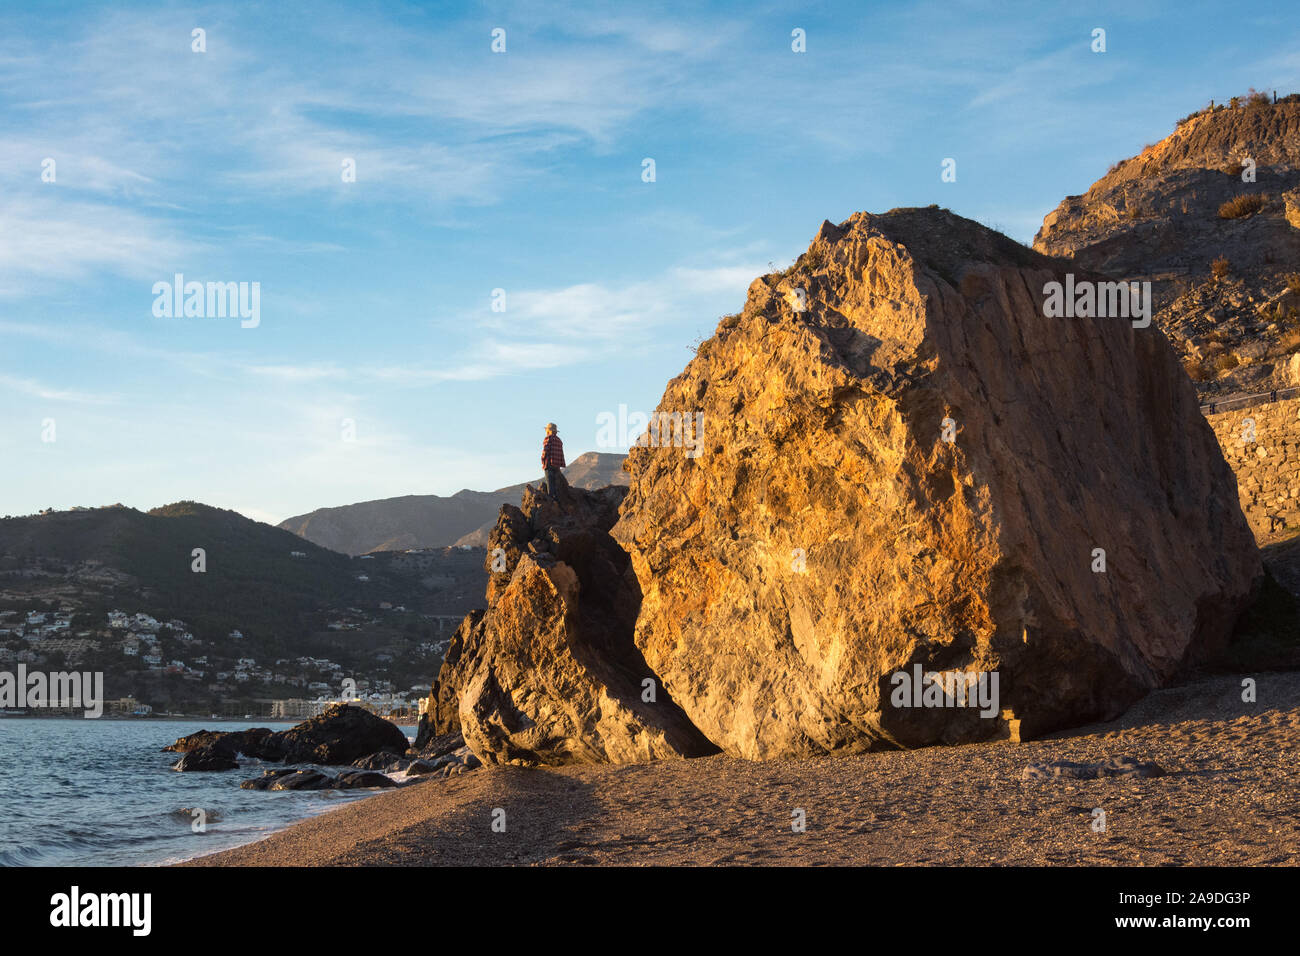 A man stands on a huge boulder he has climbed, looking out to sea on La Herradura beach in Spain. Stock Photo